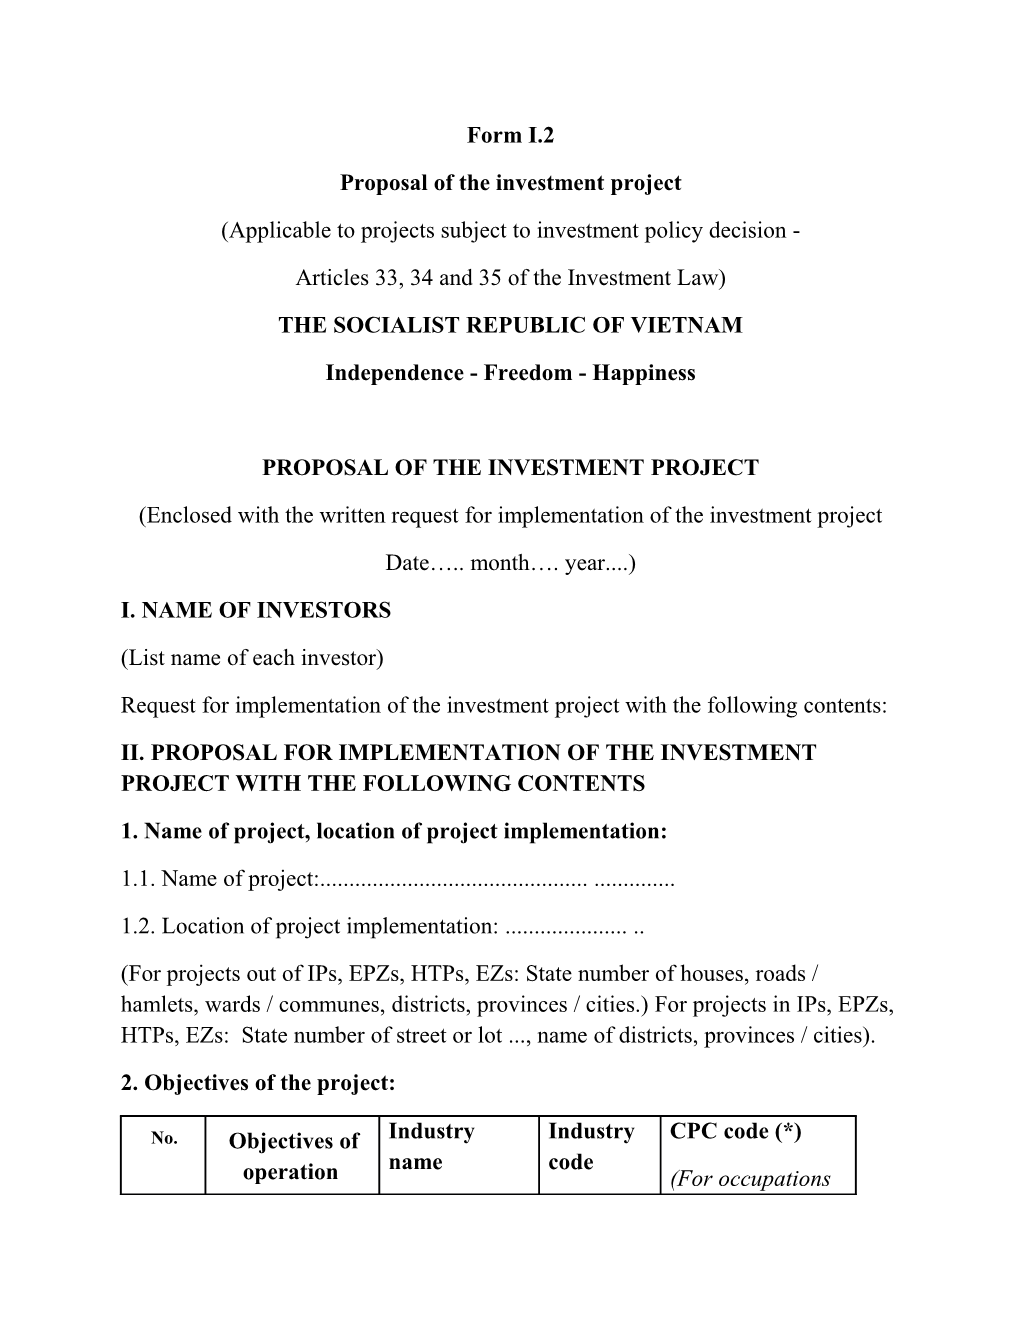 Proposal Ofthe Investment Project